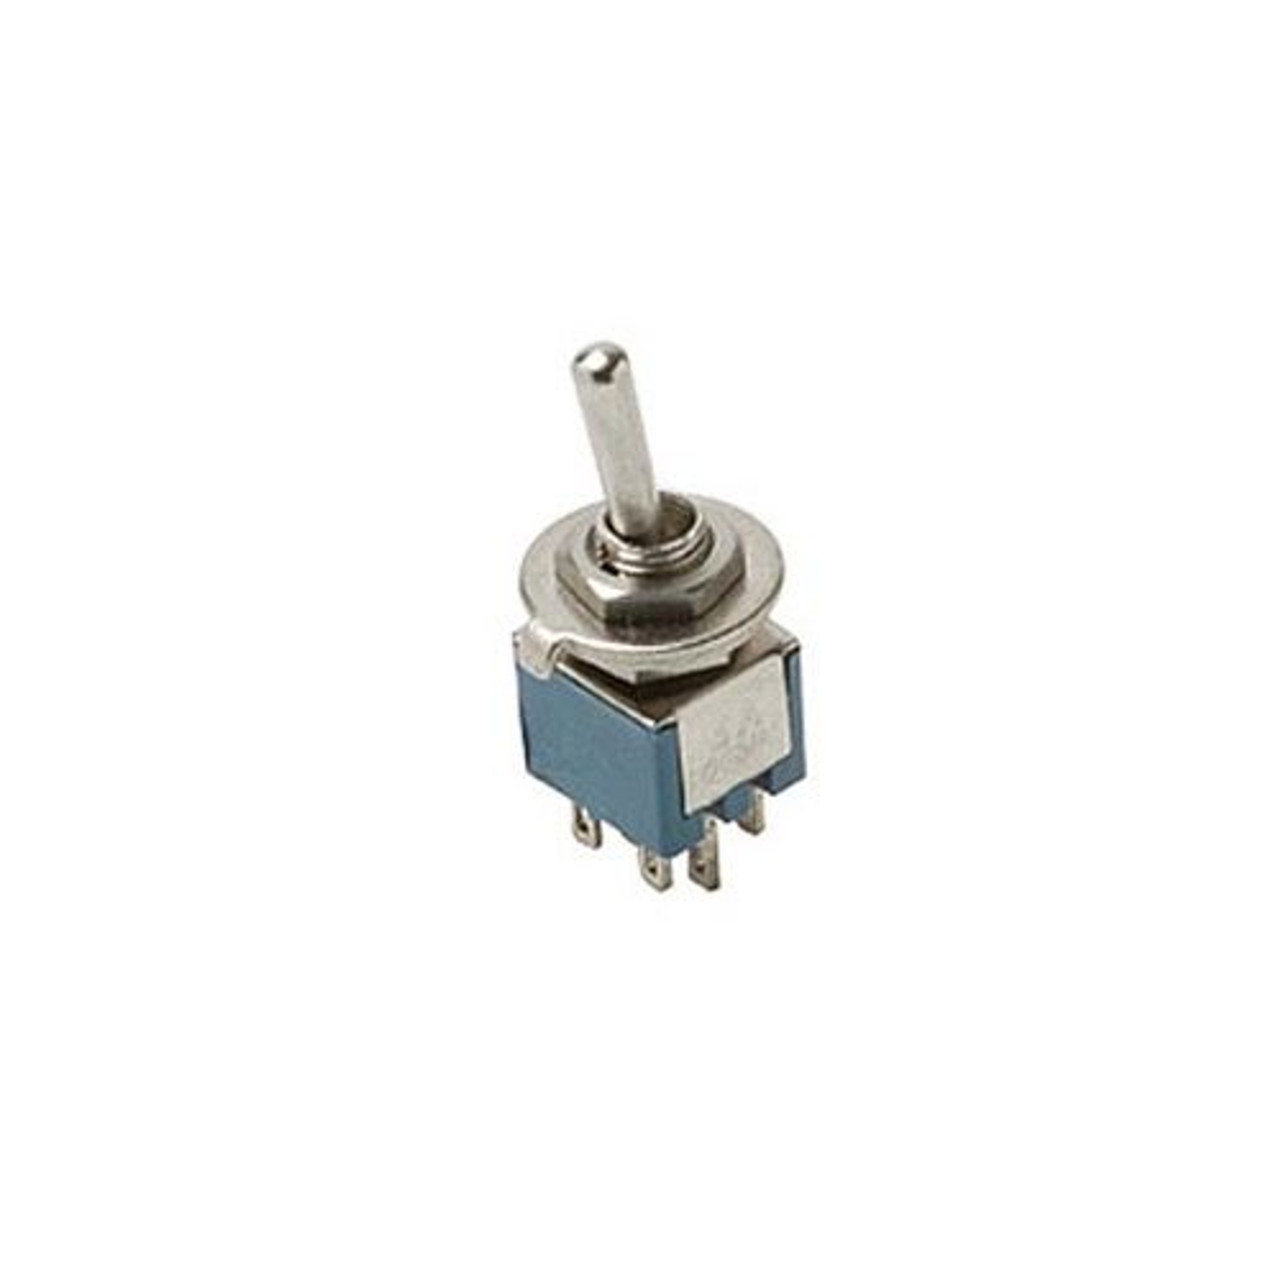 Steren 450-210 Toggle Switch SPDT On-On Sub Mini 3 A0mp Toggle Switch 3 Amp 125 VAC Solder Terminal Brass Silver Contacts Bat-Handle Panel Mountable, Part # 450210